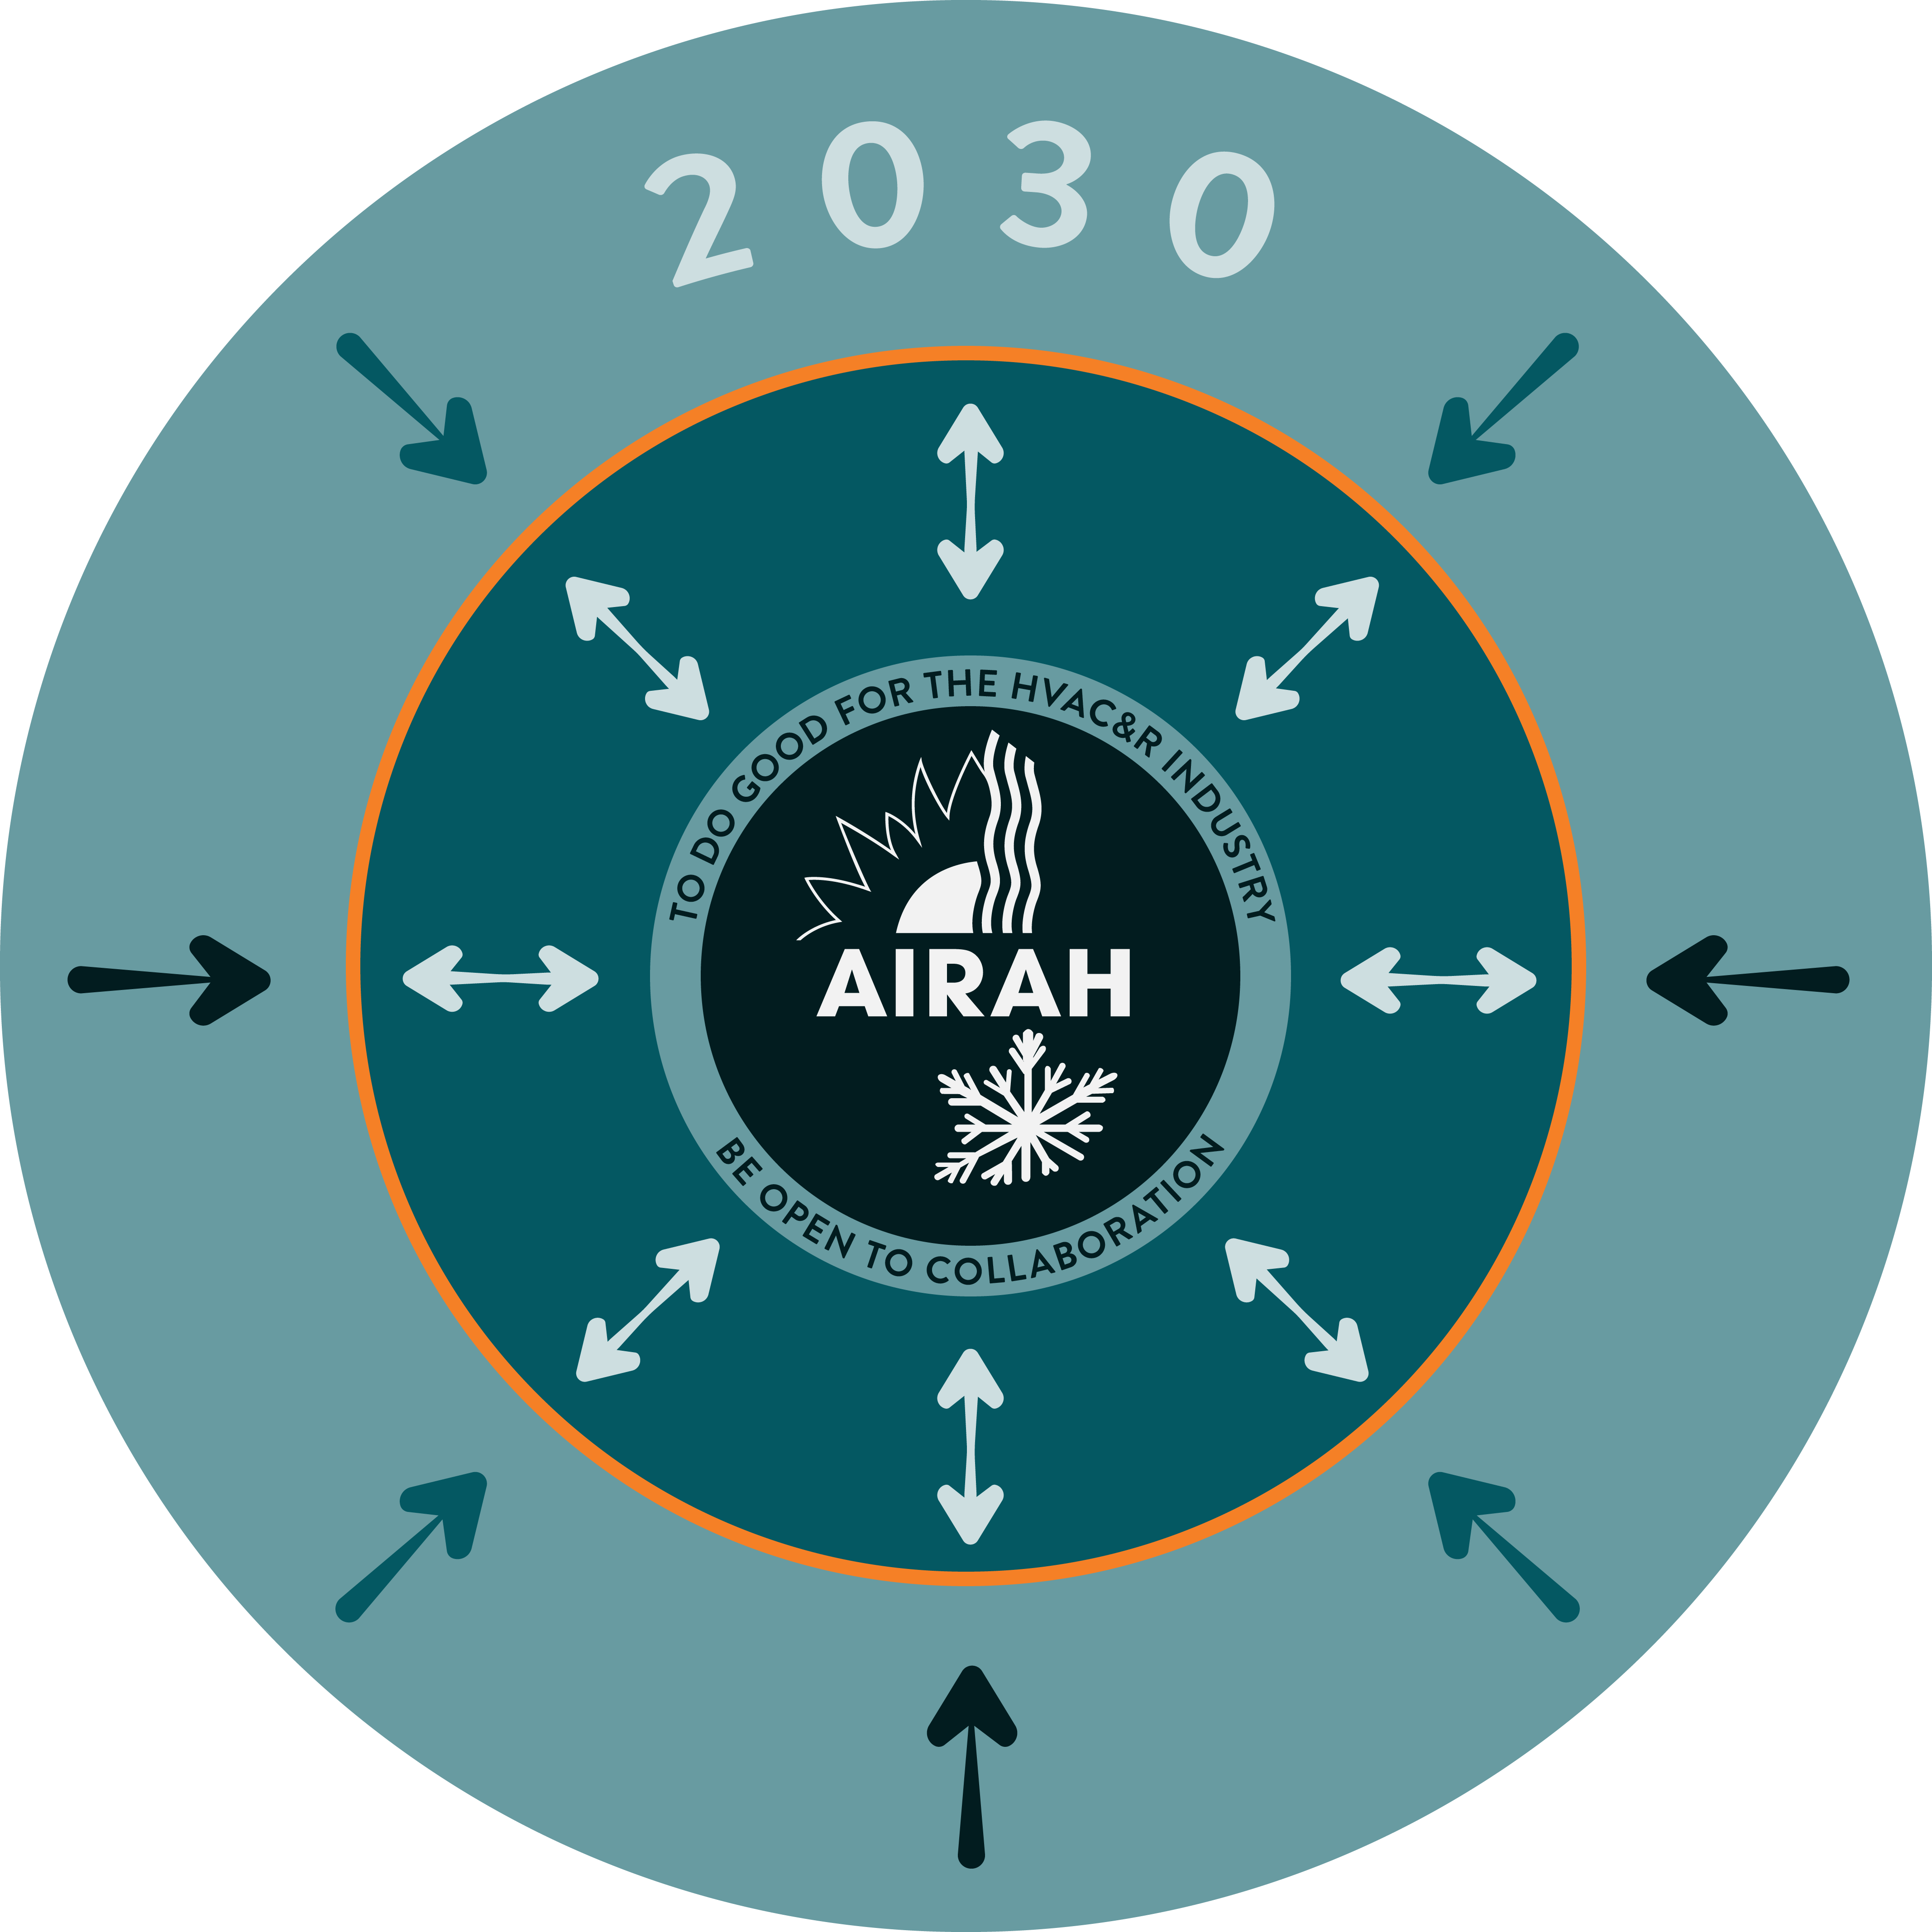 Where will AIRAH be in 2030?